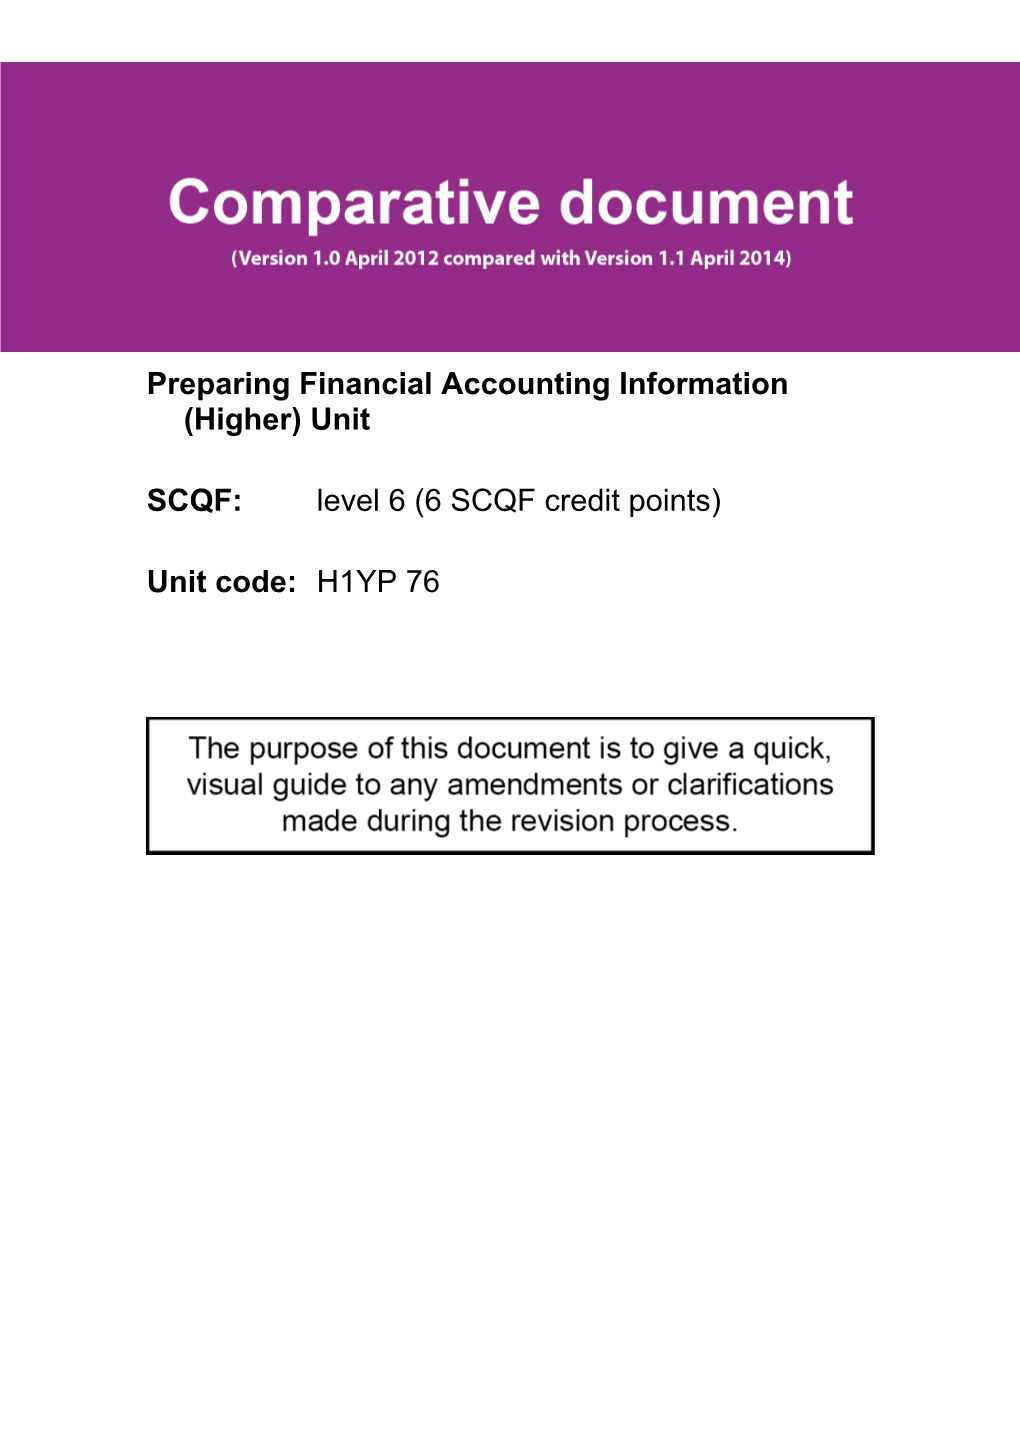 Preparing Financial Accounting Information (Higher) Unit